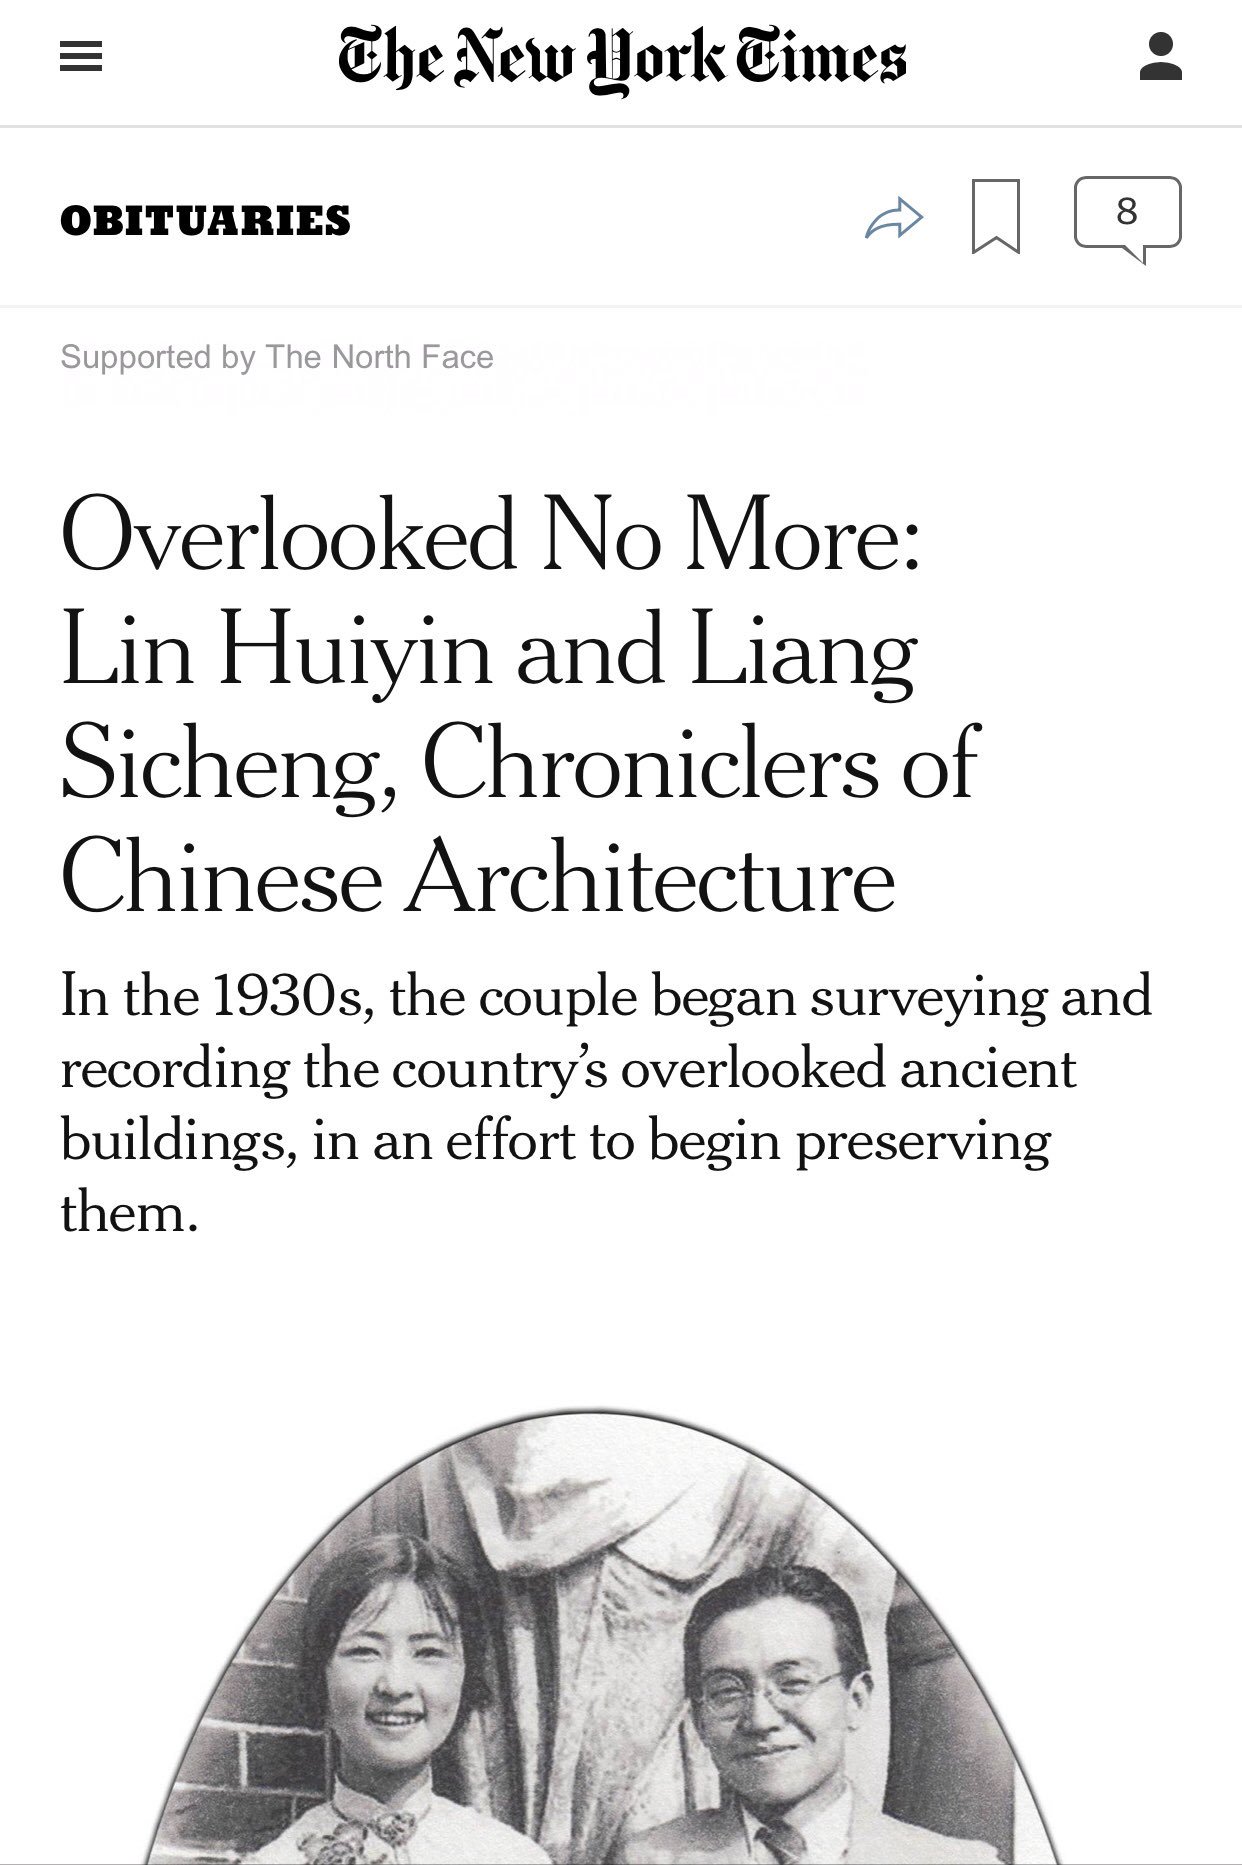 Overlooked No More: Lin Huiyin and Liang Sicheng, Chroniclers of